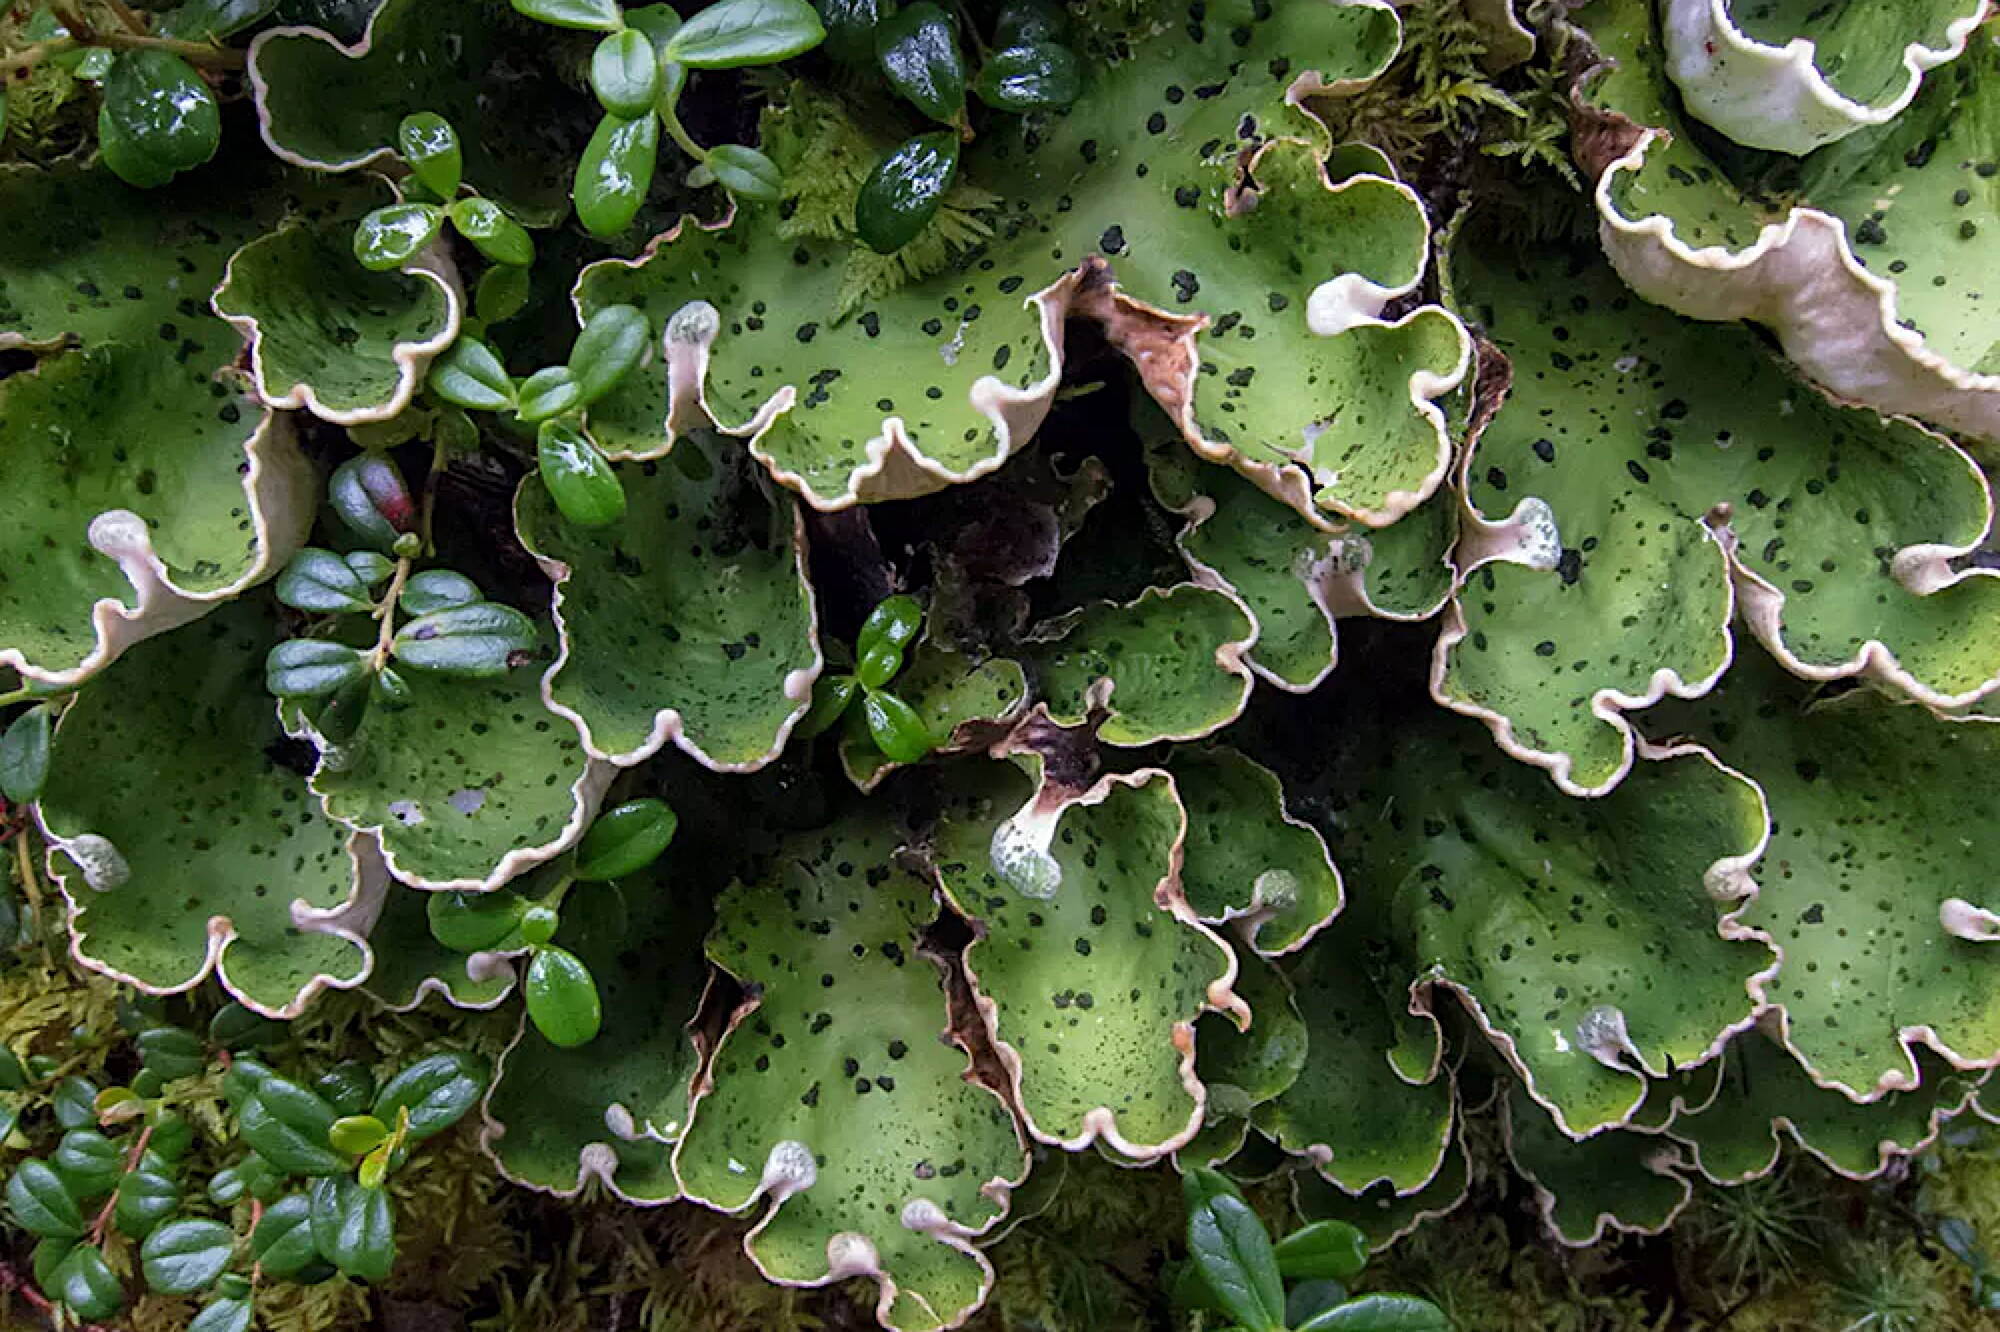 The common freckle pelt lichen (Peltigera aphthosa) is often found over mossy ground, rocks, or under trees. (James Walton / National Park Service)